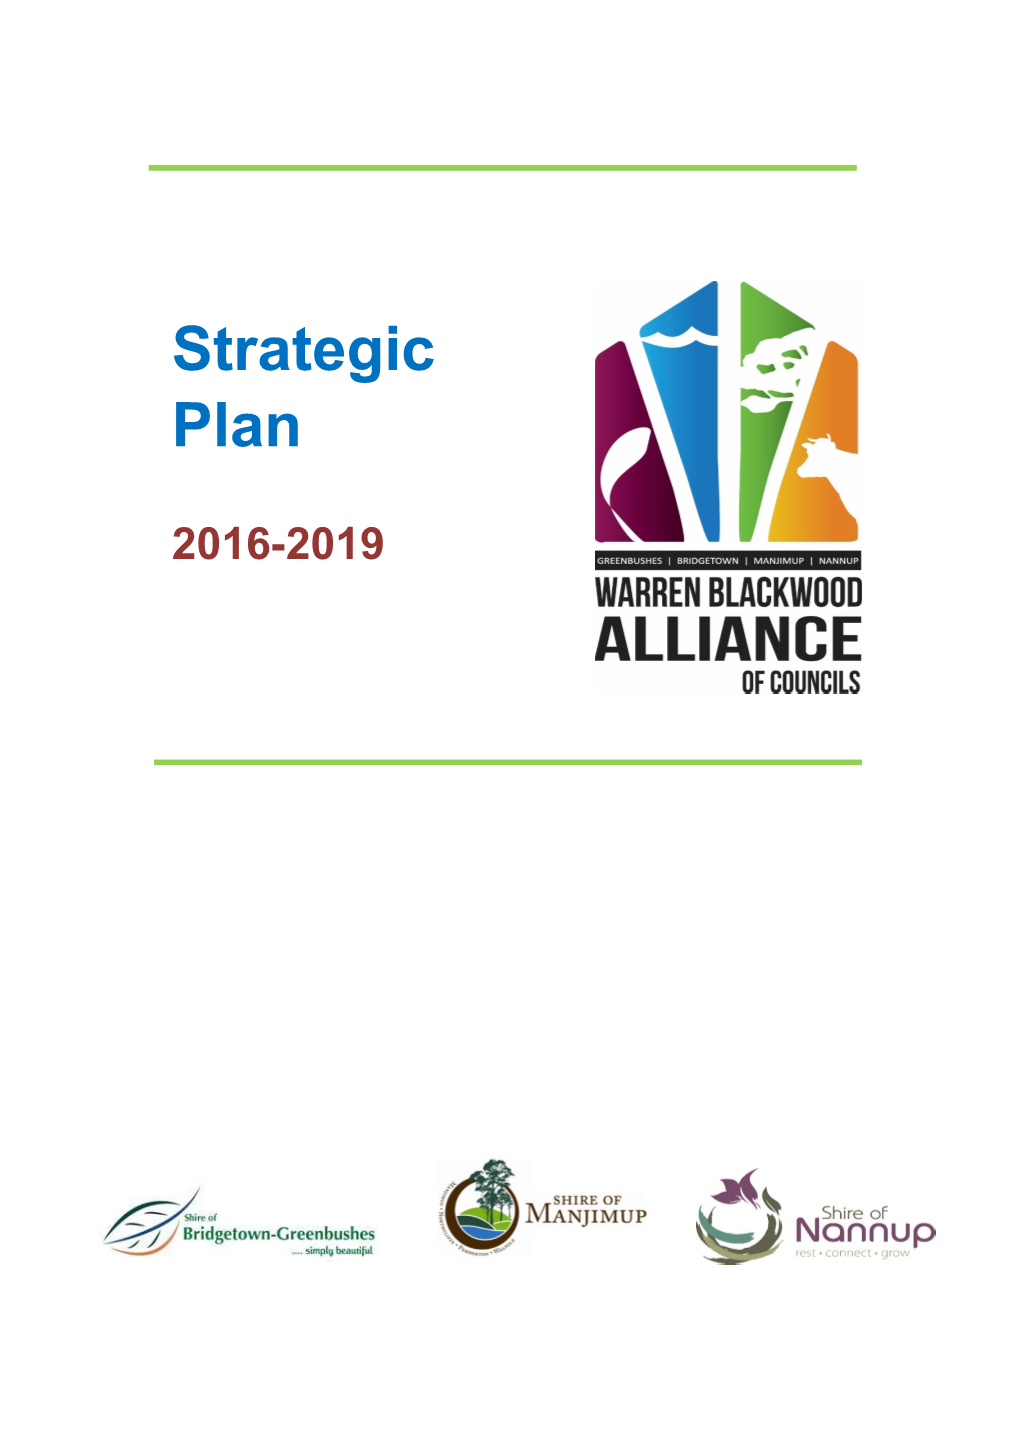 Strategic Plan Aligns with Bigger Picture Strategies and Does Not Conflict with Other Major Plans